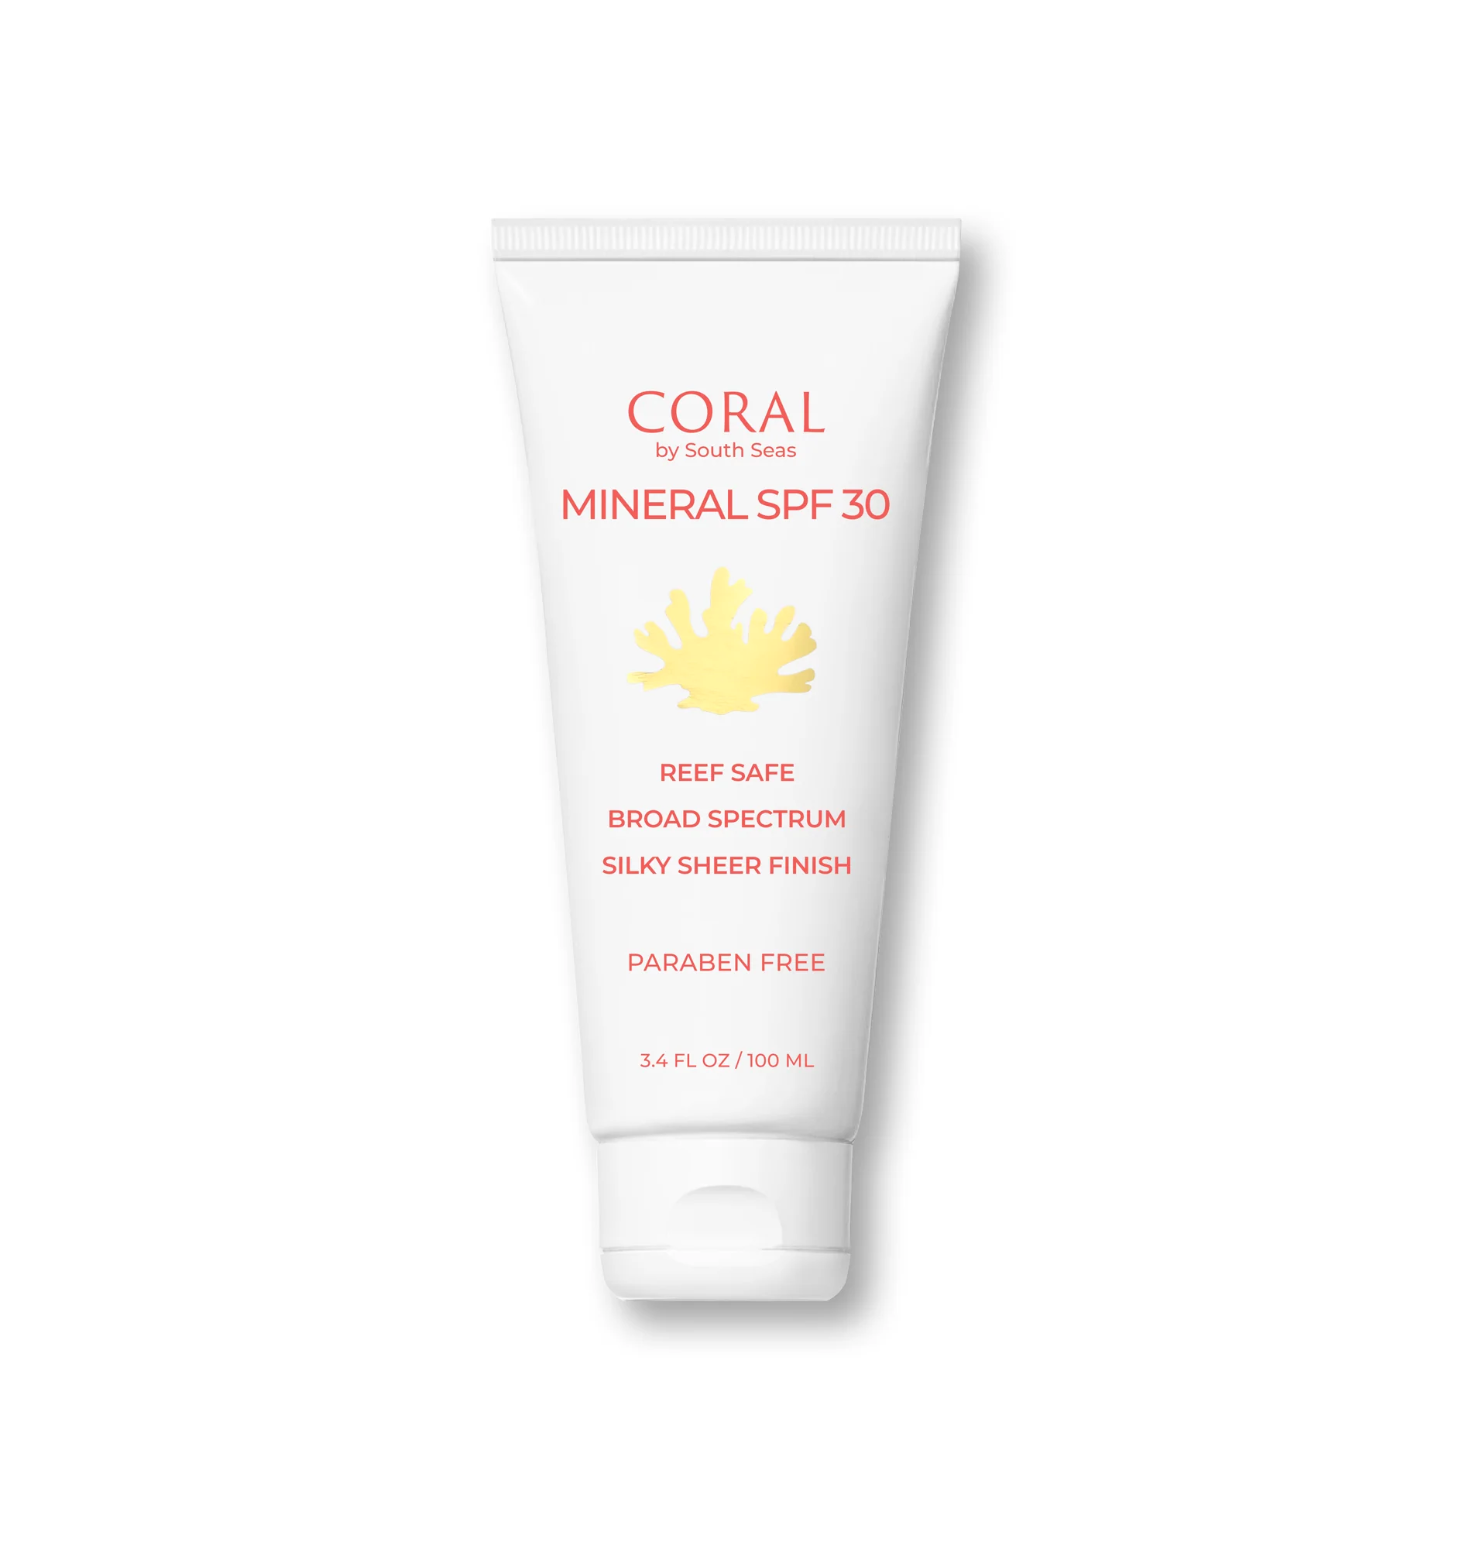 A white tube of Coral Mineral SPF 30 sunscreen by South Seas Skincare, featuring a yellow coral graphic and text highlighting its features: reef safe, broad spectrum protection, silky sheer finish, paraben free. The tube, perfect for maintaining a sunless tan, has a flip cap and contains 3.4 fl oz (100 ml).